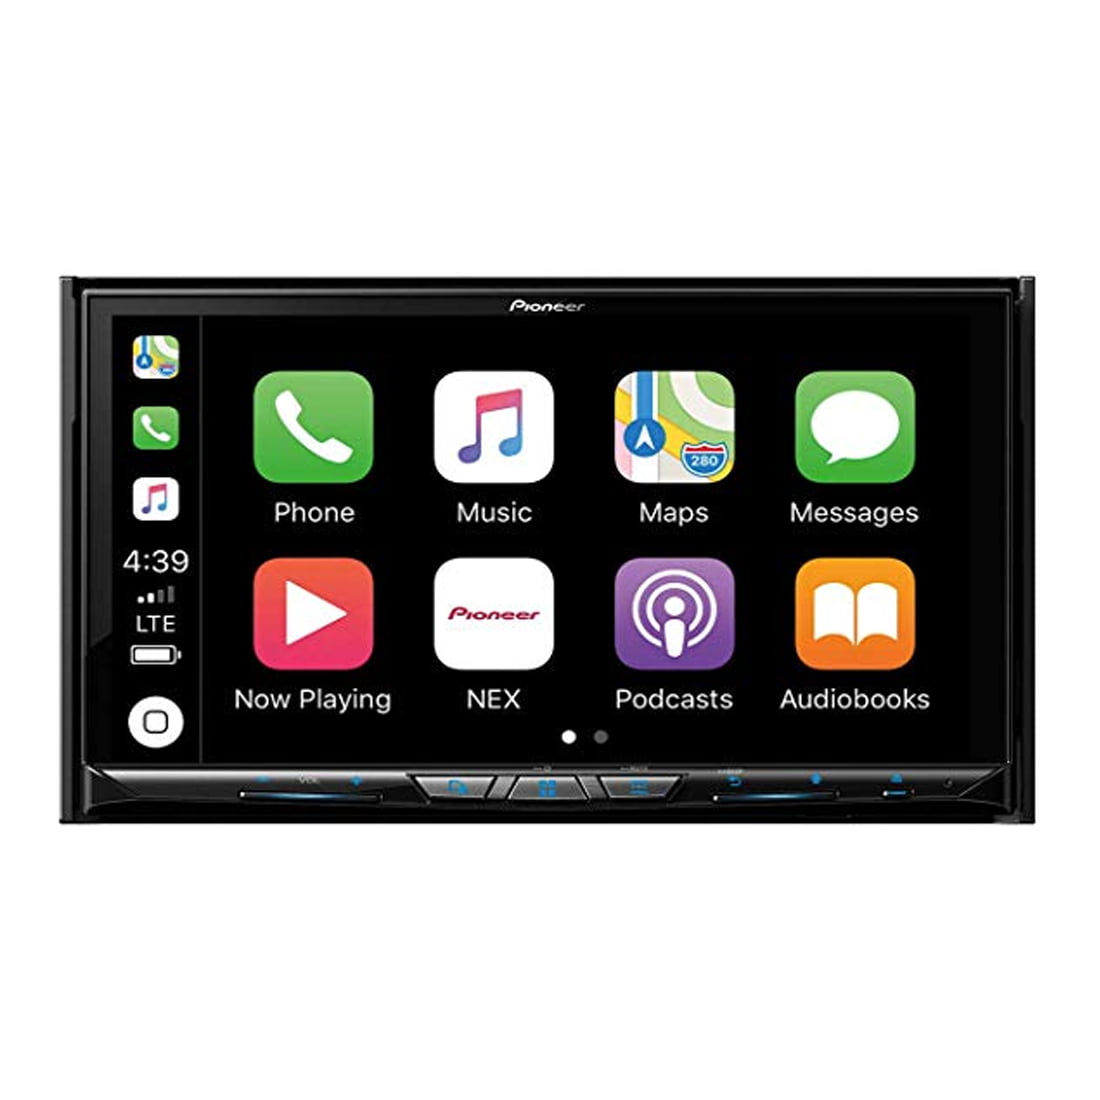 Pioneer AVIC-W8600NEX Flagship In-Dash Navigation AV Receiver with 7" WVGA Capacitive Touchscreen Display